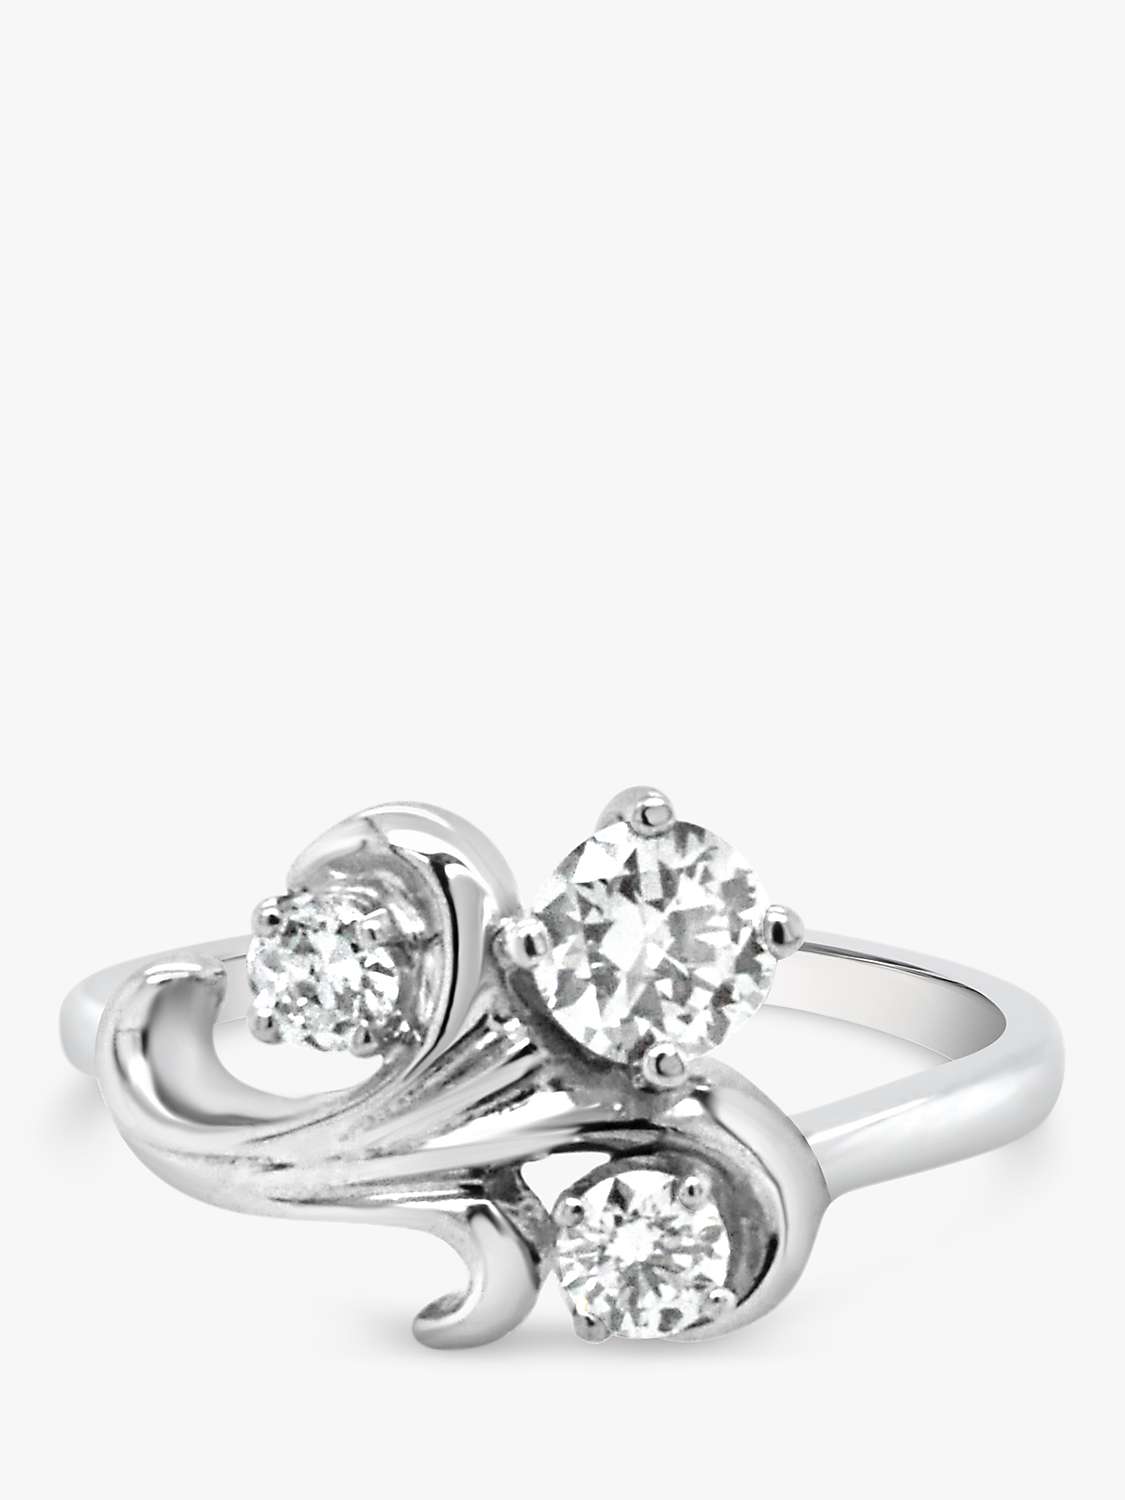 Buy Milton & Humble Jewellery Second Hand 14ct White Gold 3 Stone Diamond Ring Online at johnlewis.com